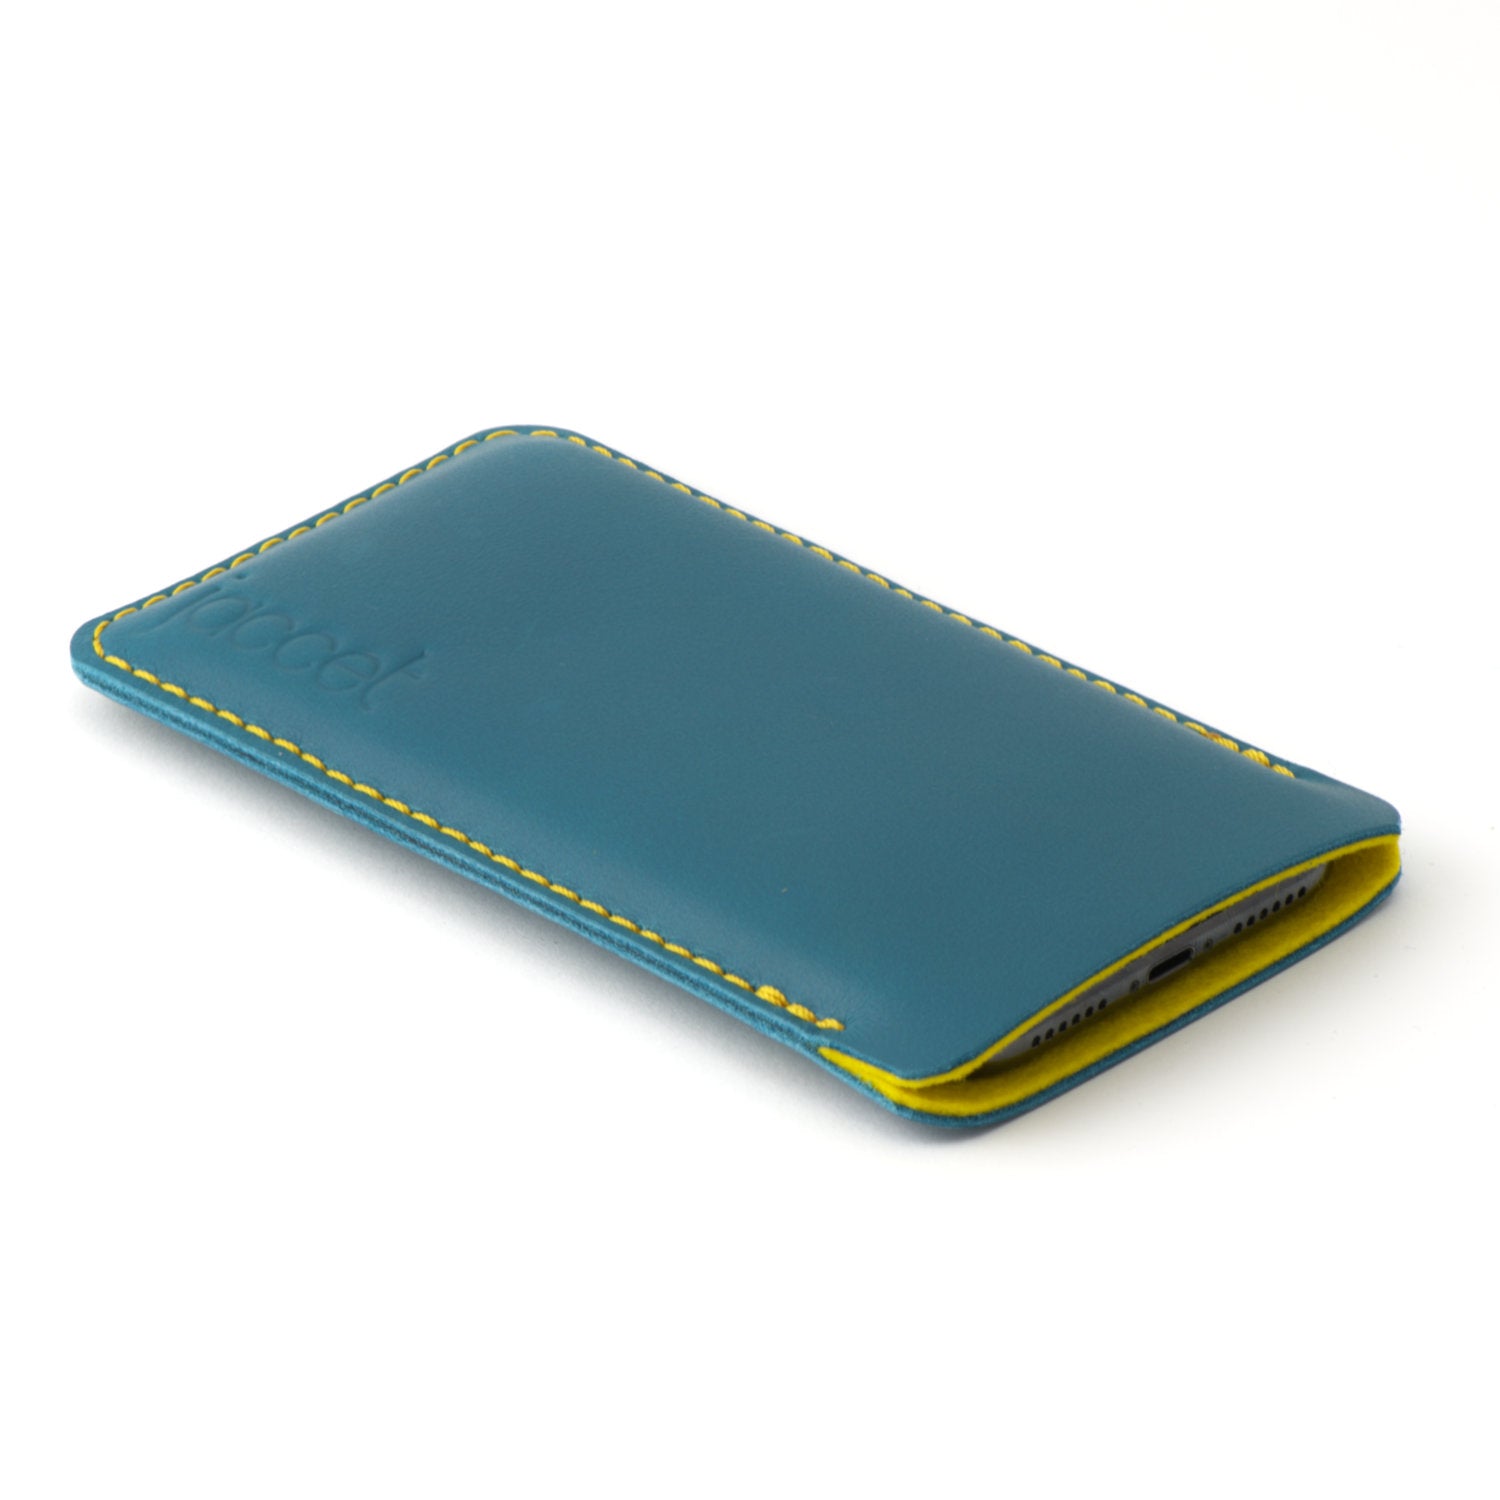 Full-grain leather Xiaomi sleeve - Turquoise leather with yellow wolvilt - 100% handmade